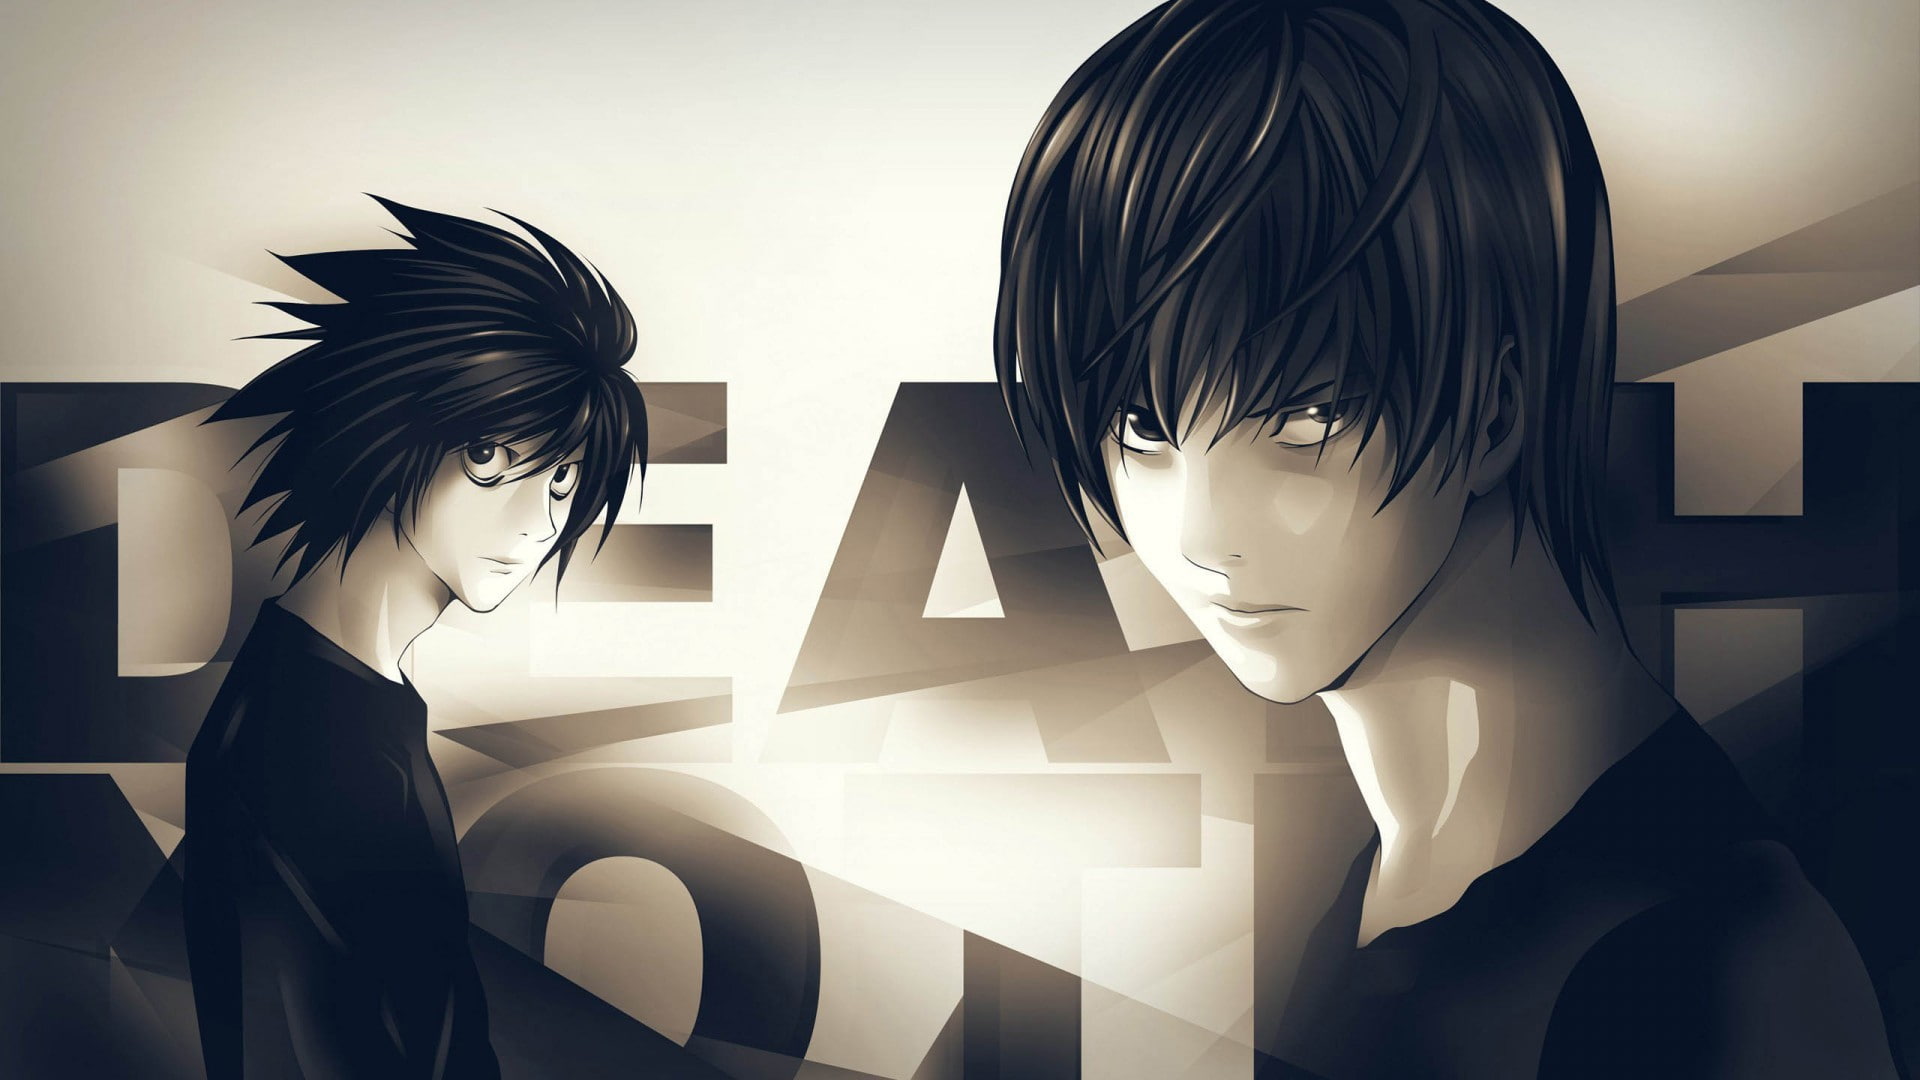 anime, Death Note, Lawliet L, Light Yagami